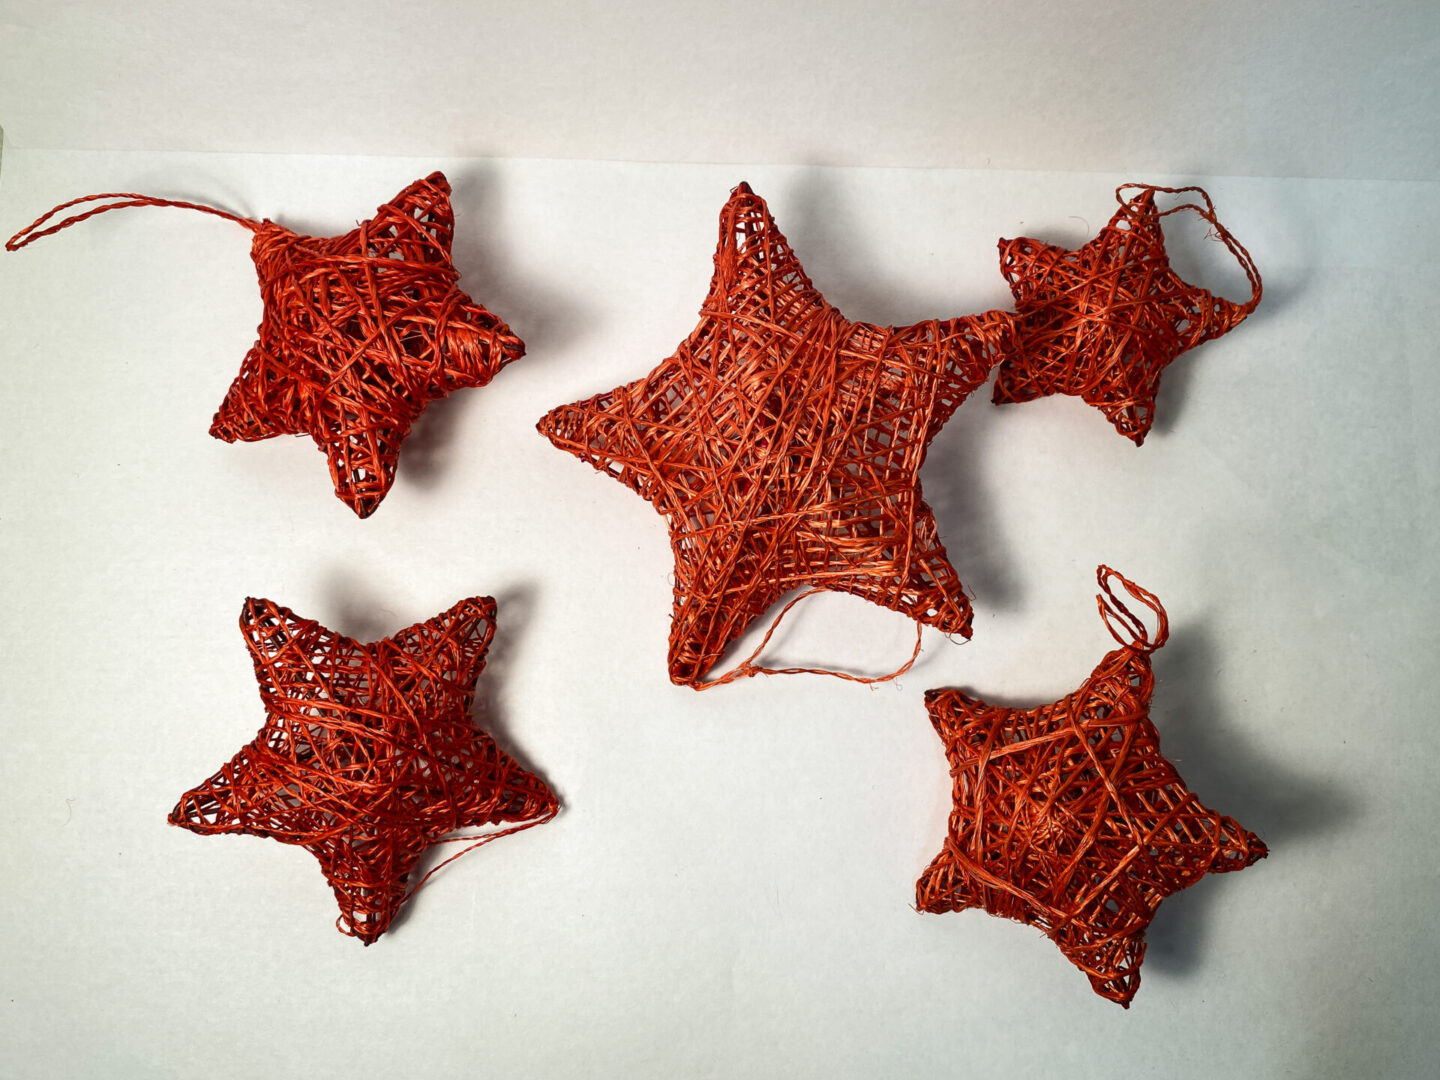 Red Star Ornament